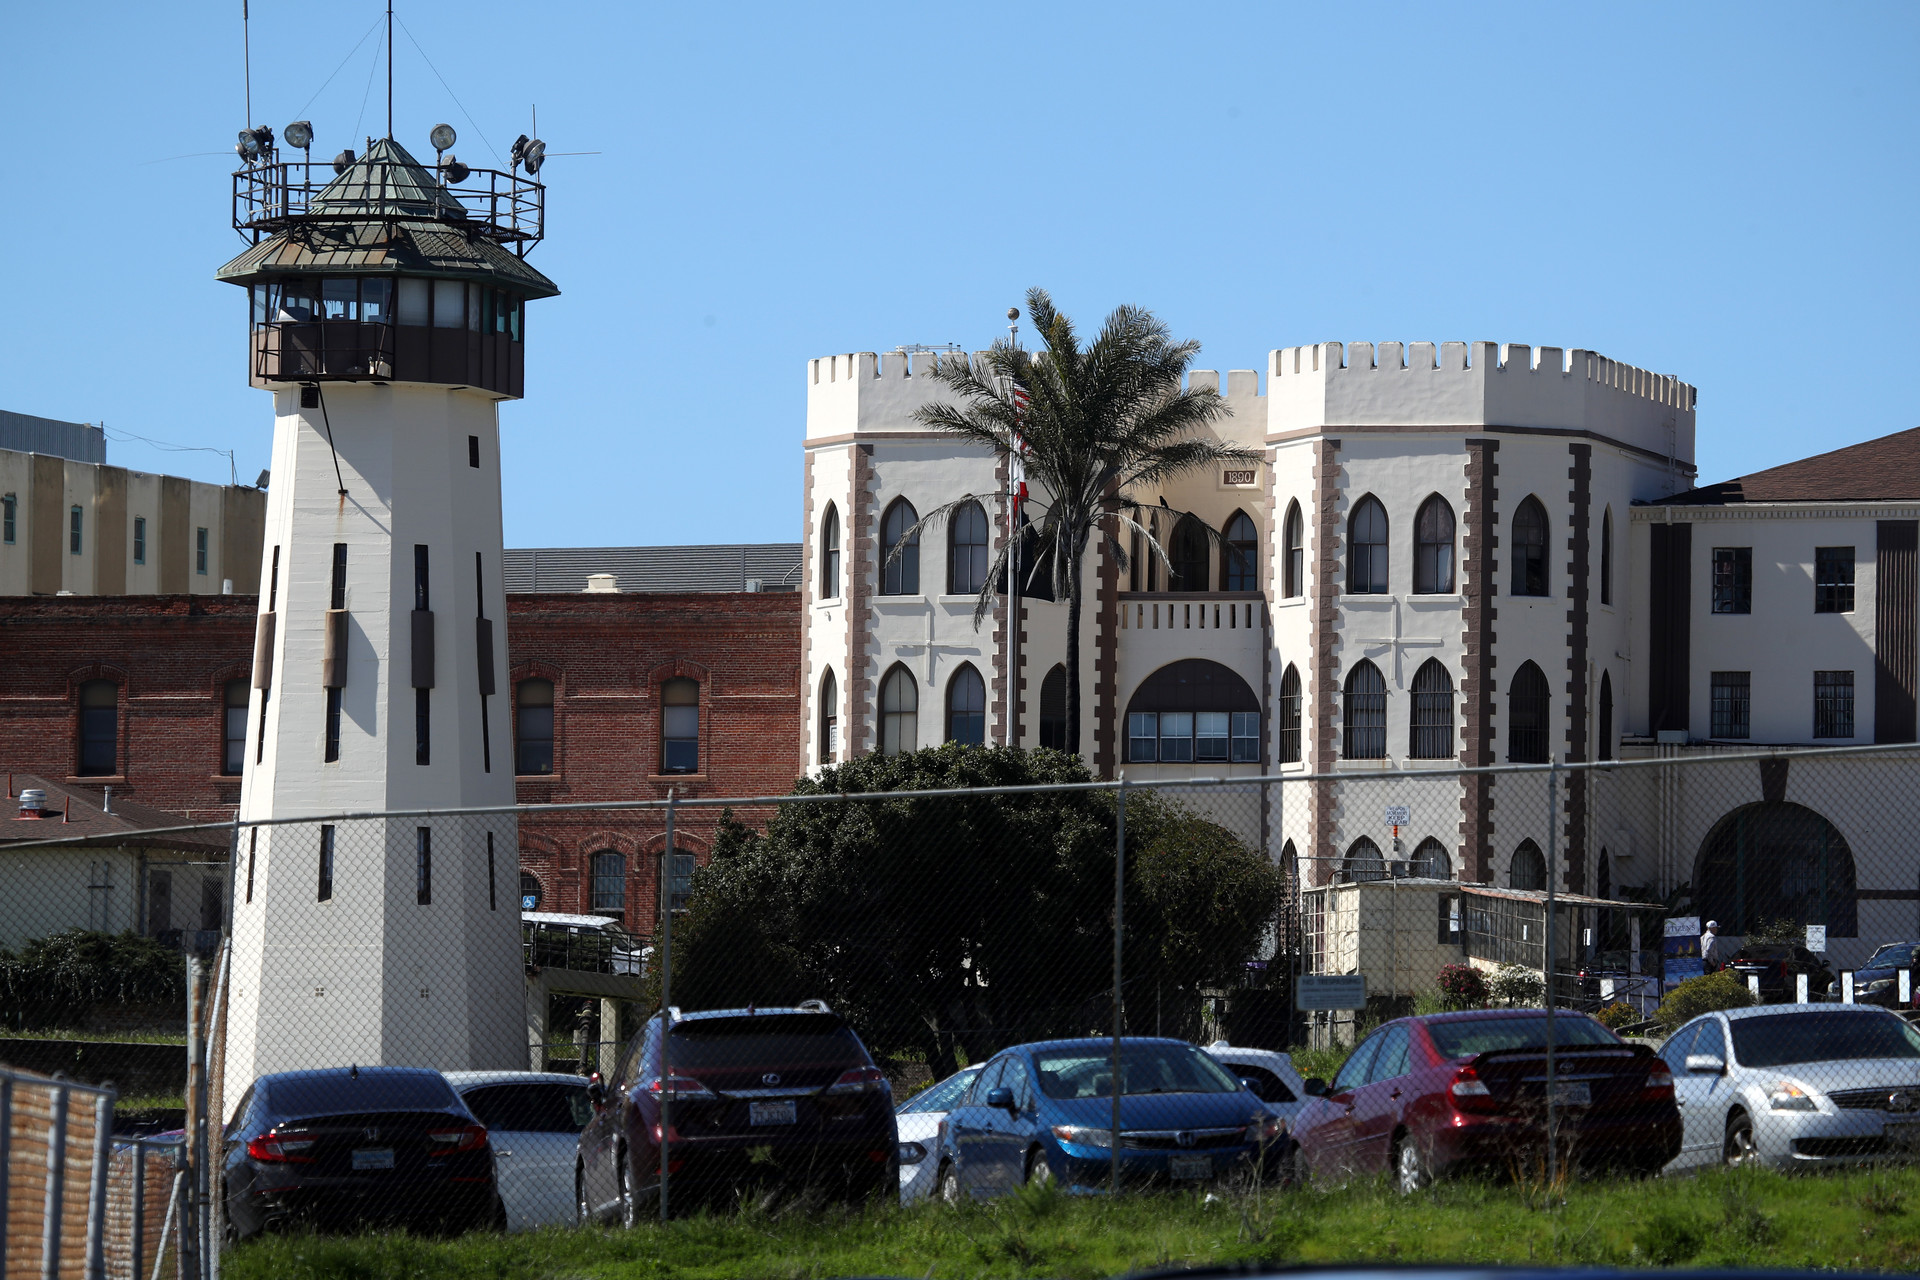 The white turret-like facade and guard toward of the prison, beyond the parking lot.